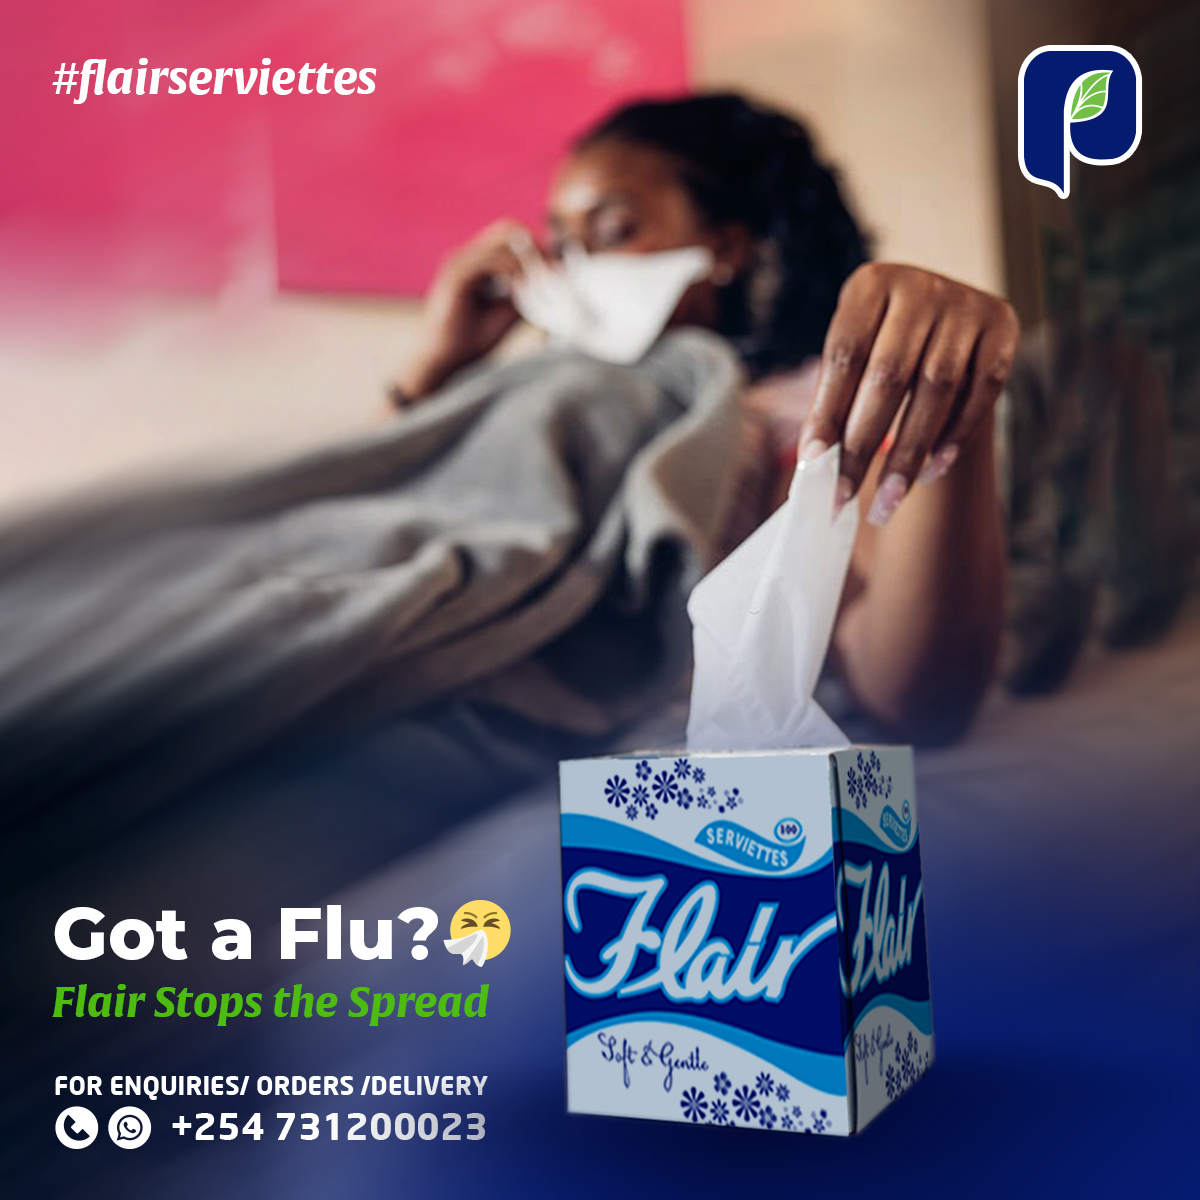 Got a Cold or Flu?  #flairserviettes STOP🚫 the Spread. For Enquiry | Orders | Delivery 📞+254 731200023
-
#prideindustriesltd #serviettes #hygiene #cleanofficespace #healthyoffice #SurfaceDisinfection #papernapkins
#Freedom #LinkedIn #AmberRay